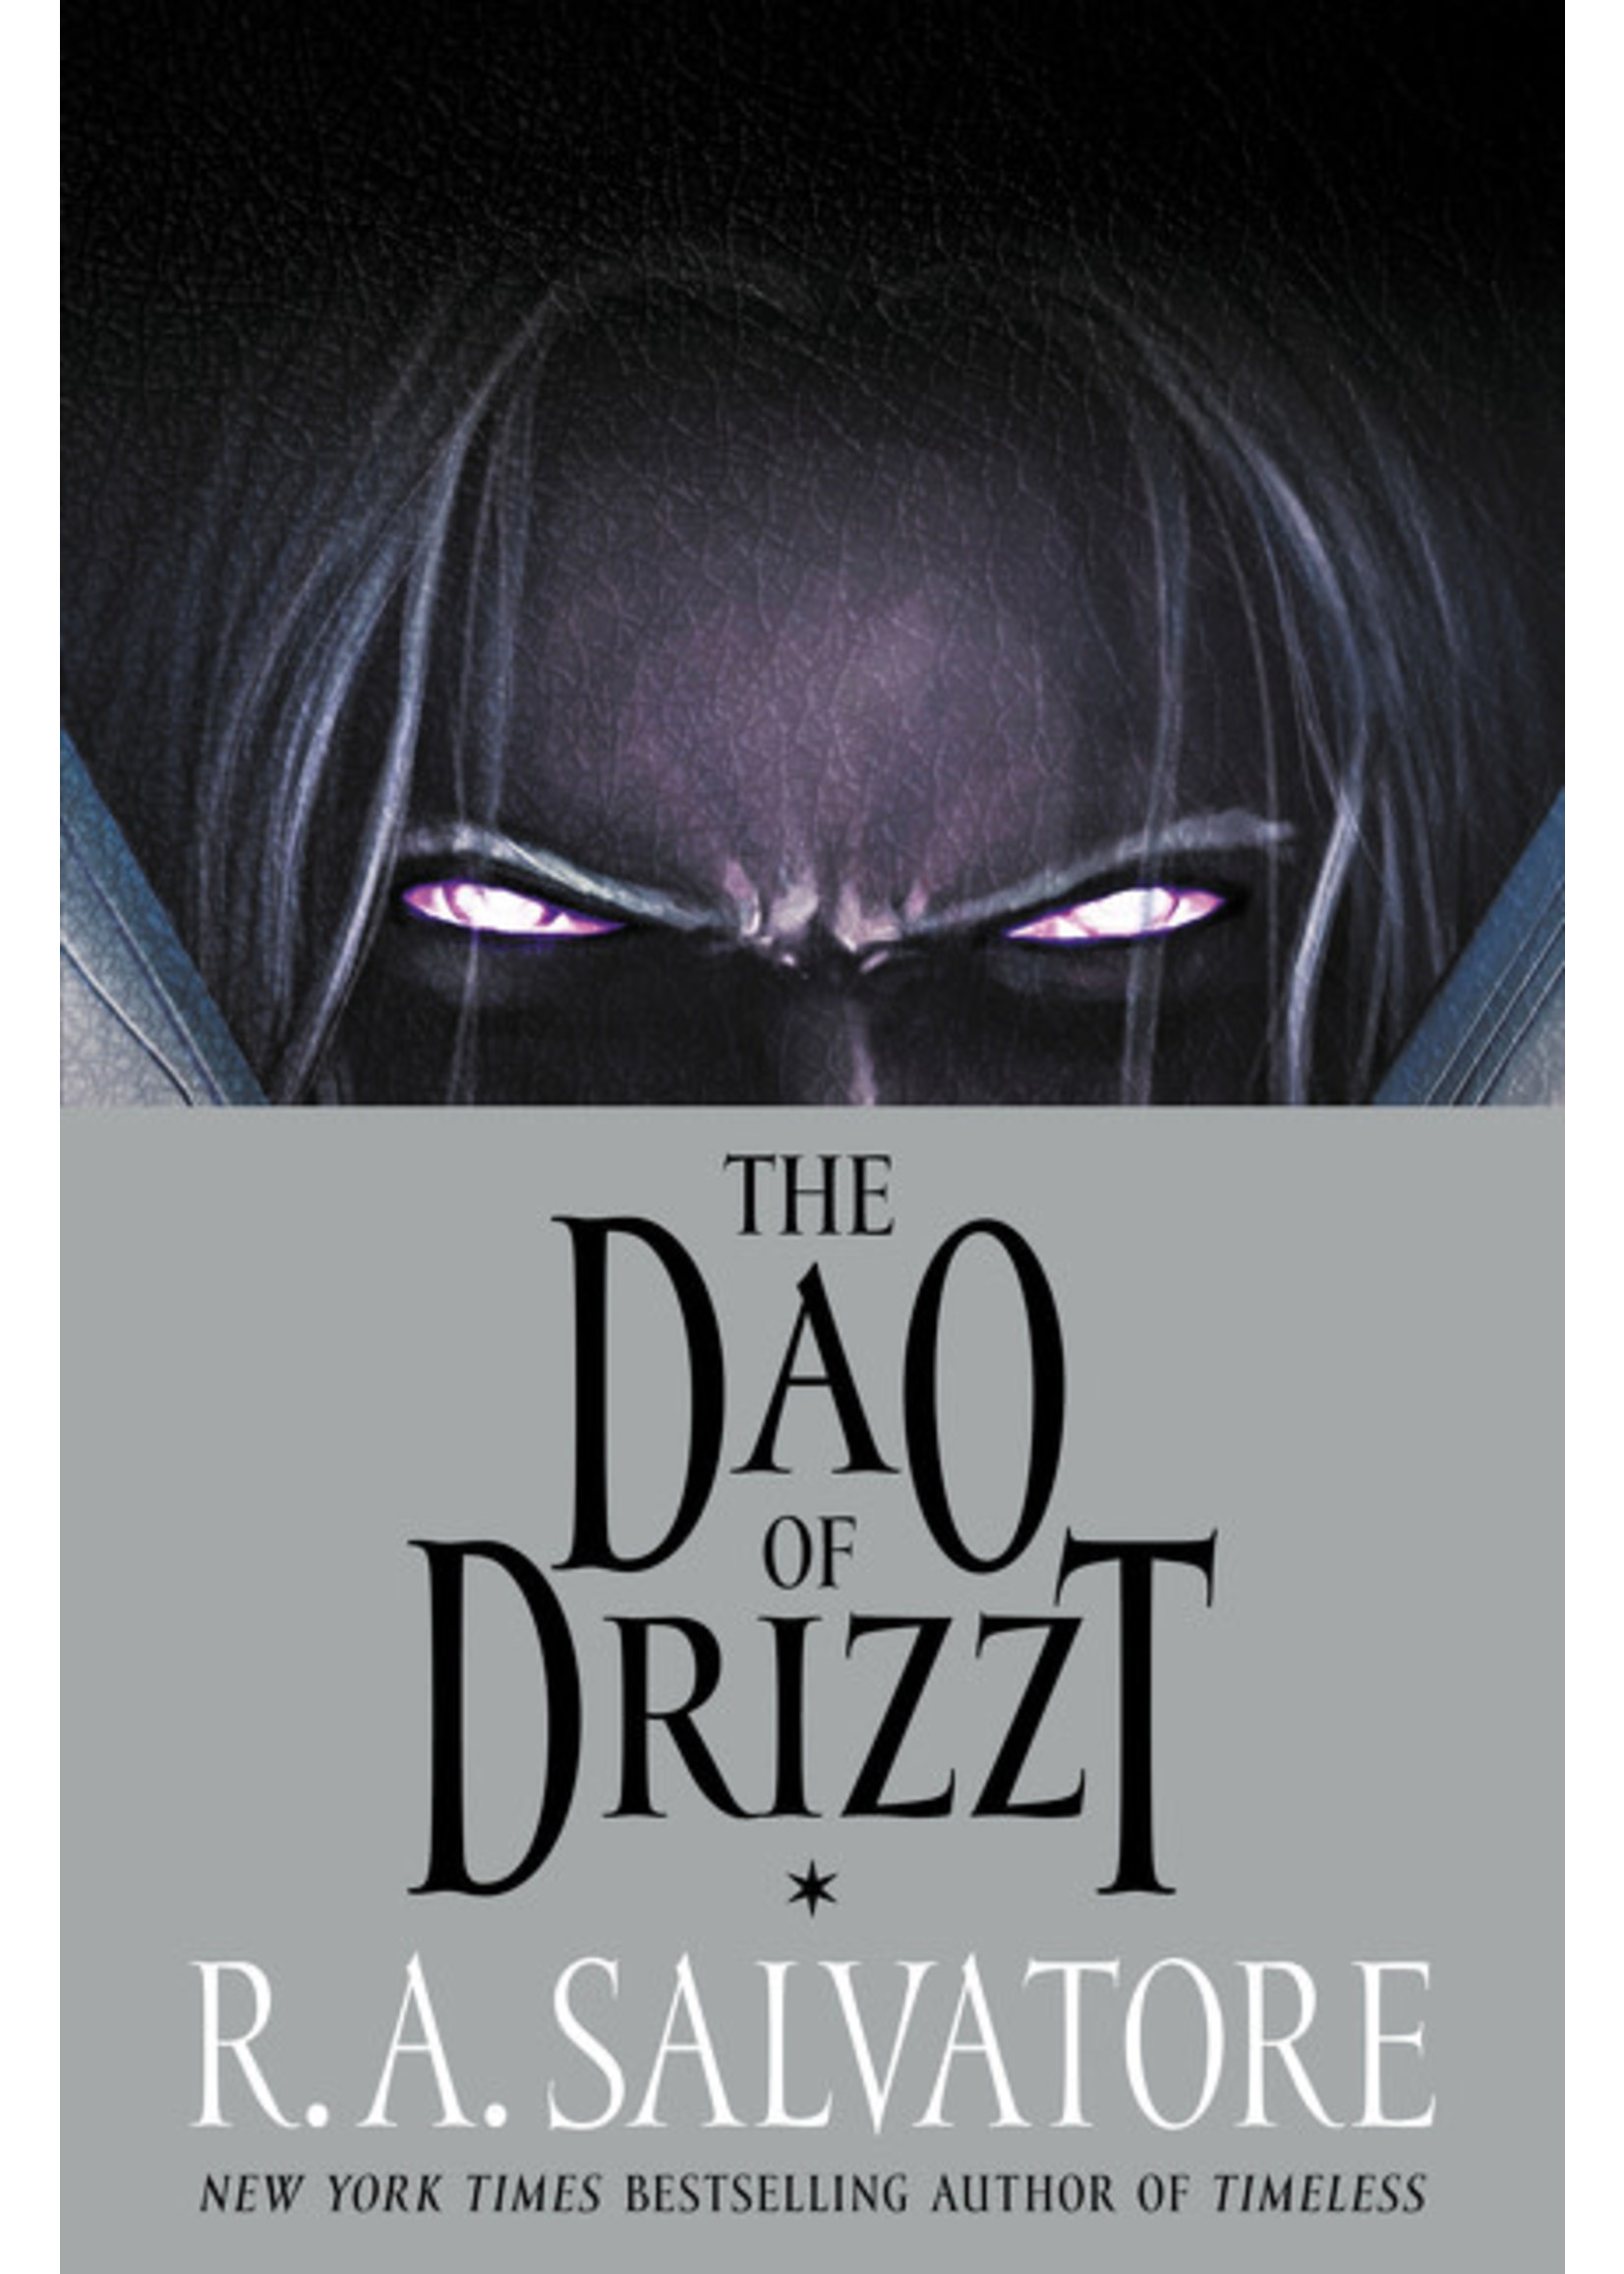 The Dao of Drizzt by R. A. Salvatore